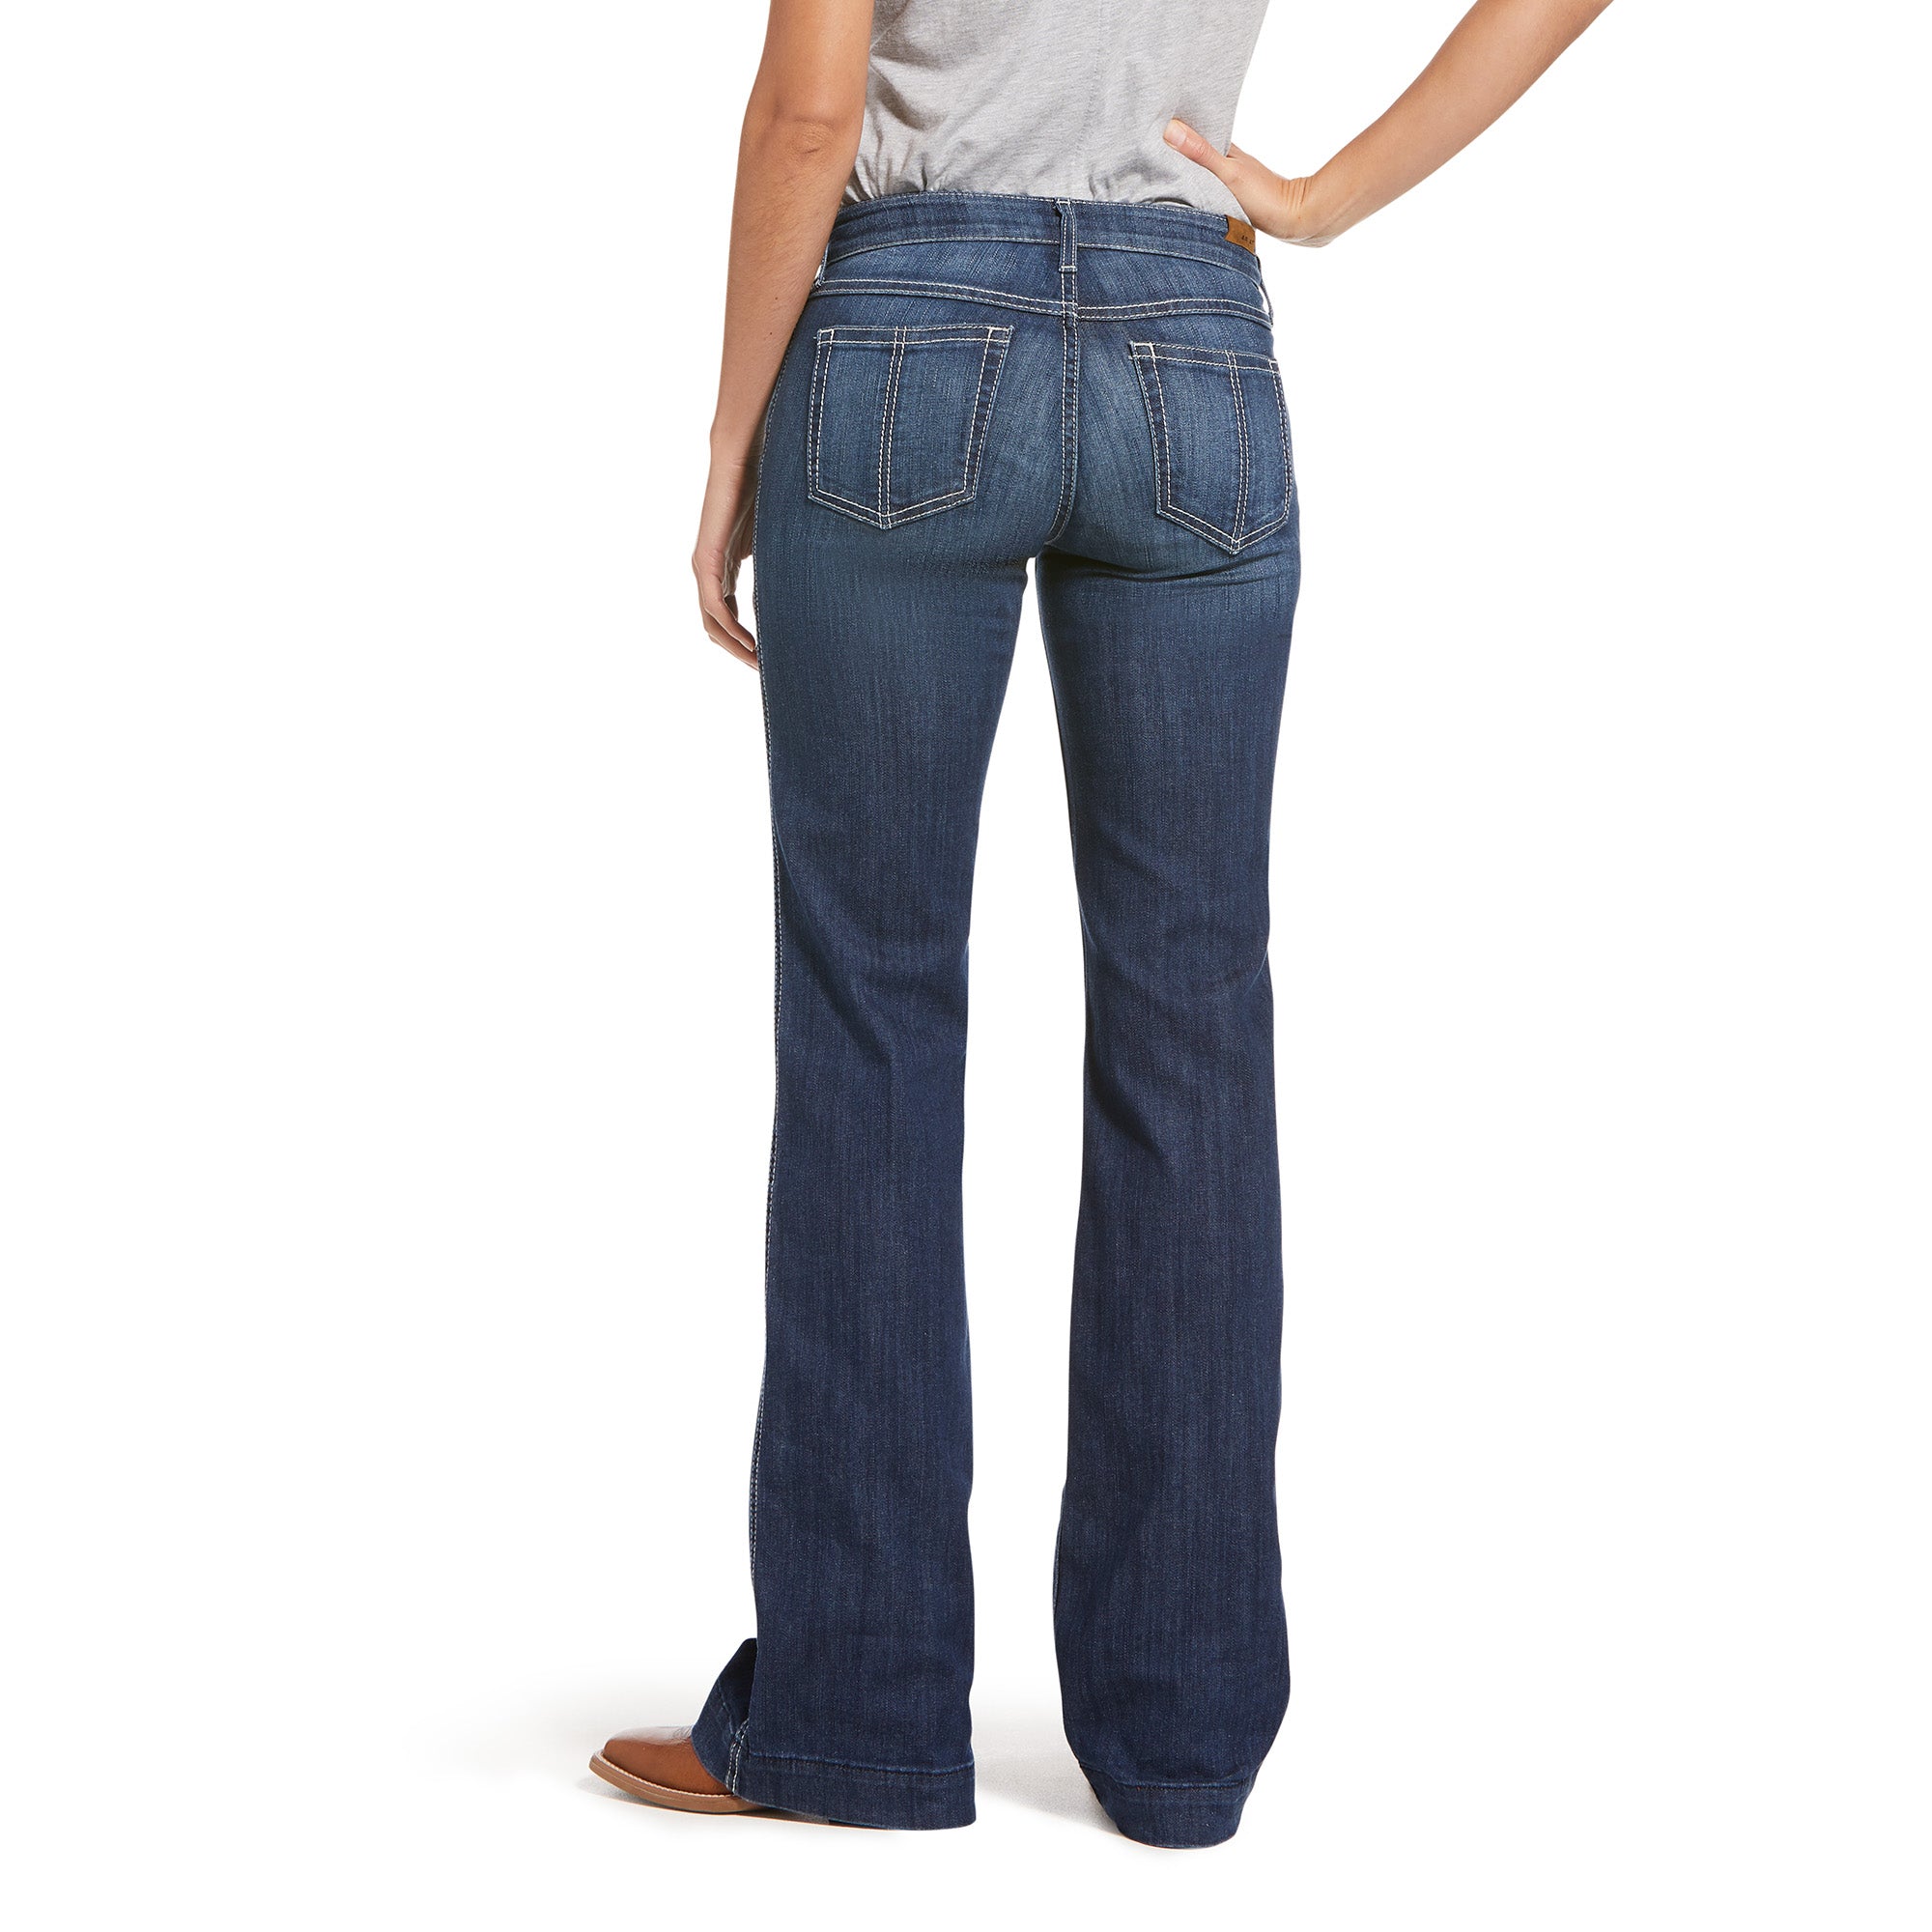 Ariat Lucy Trouser Jeans